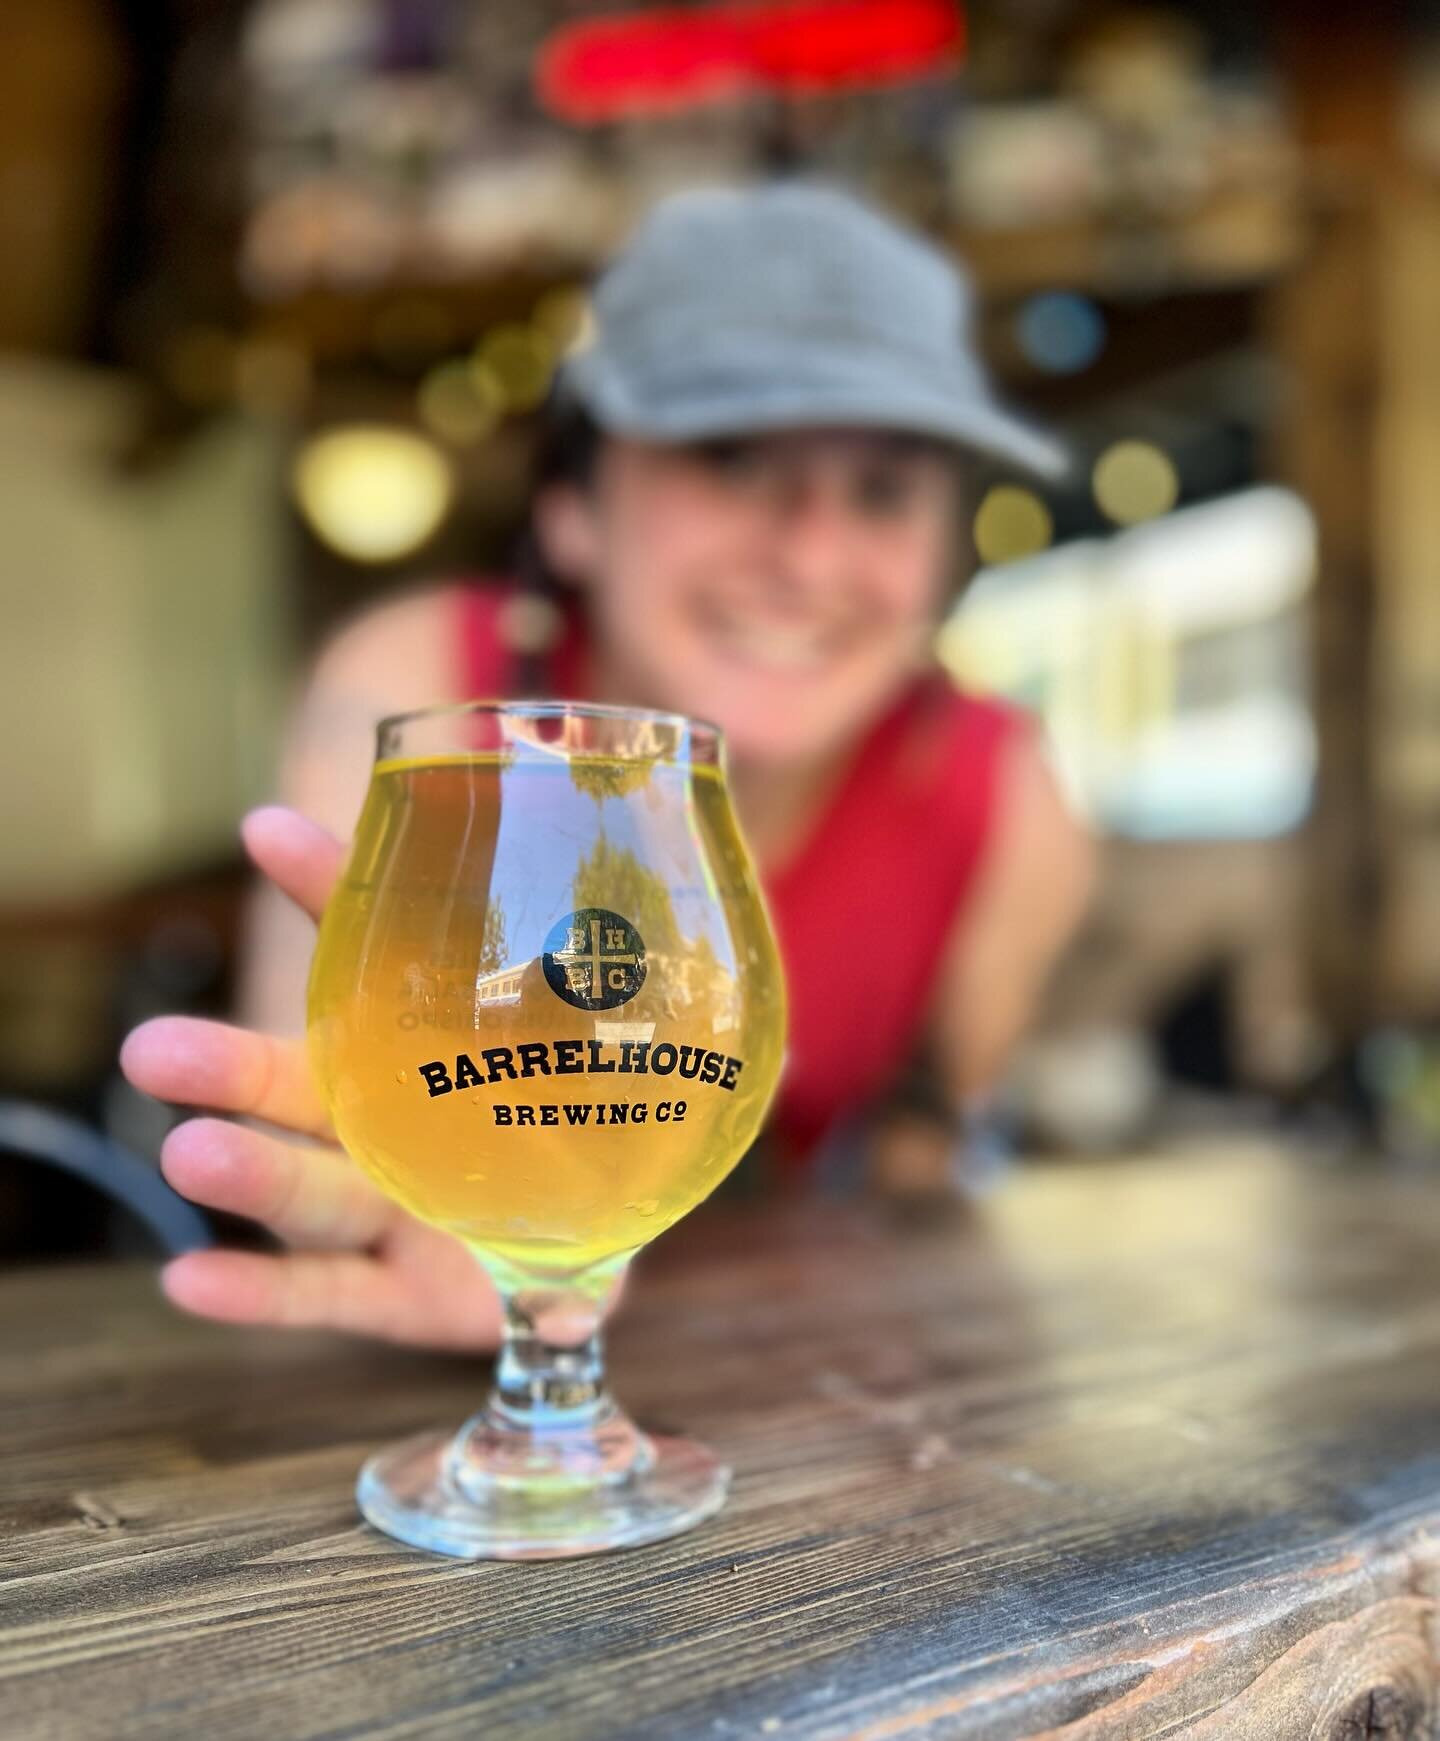 Warm weather and a nice cold crisp Barrelhouse Cider, we say it&rsquo;s a match made in heaven! 🌞

Come enjoy this beautiful weather with this delicious cider in our upstairs sitting area! 😍

We have Trivia Tonight at 8pm! 🙌🏻

Cheers! 🍻

#barrel